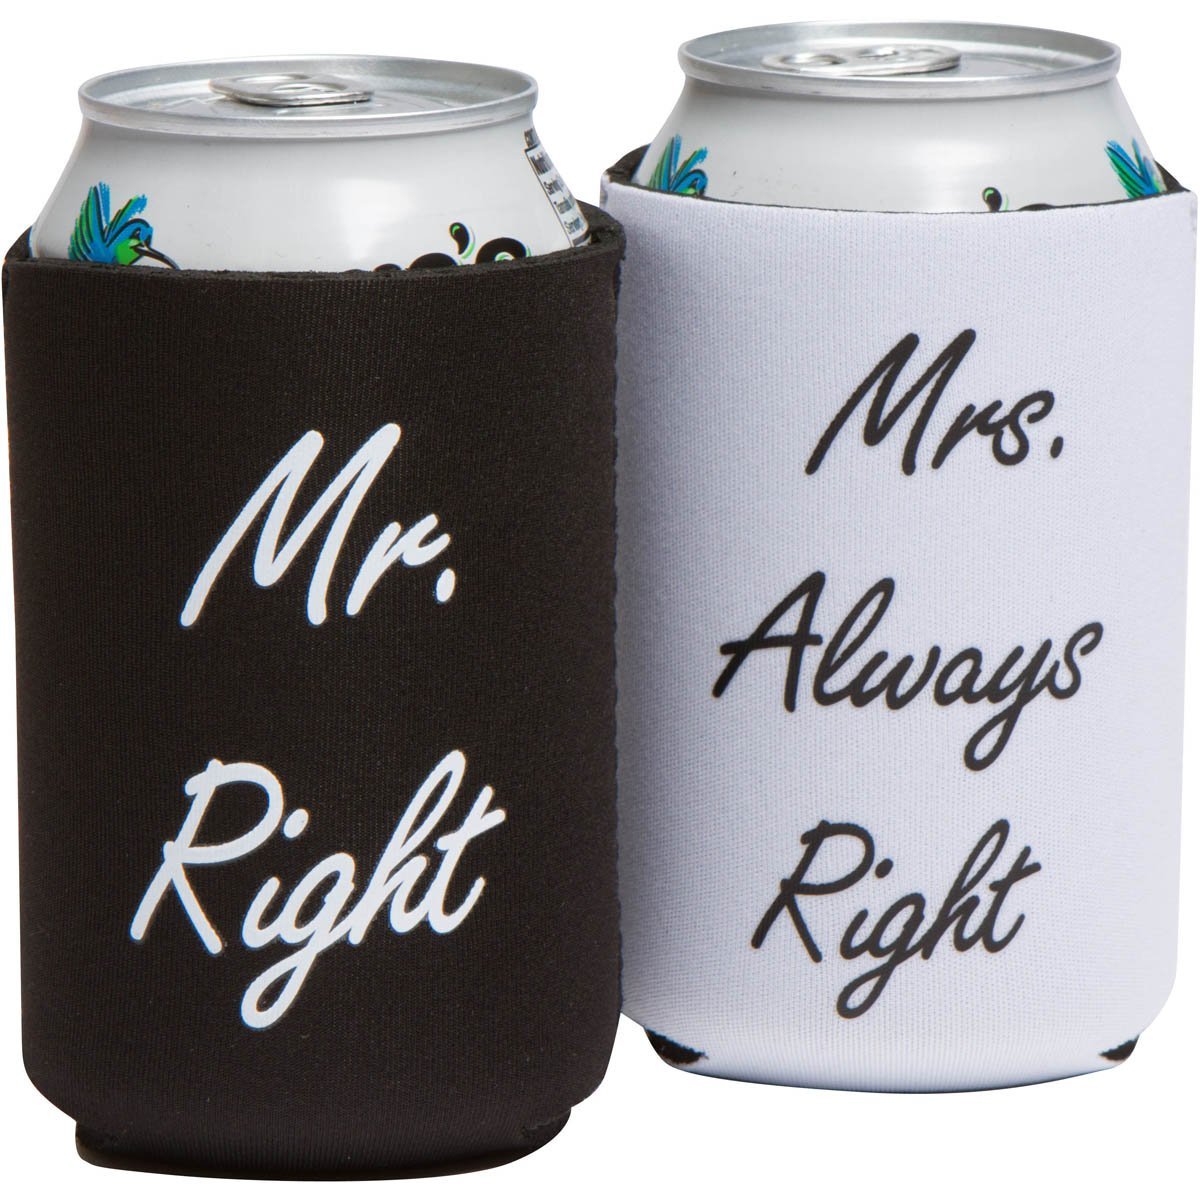 Mr Right and Mrs Always Right Wedding Can Cooler Set 